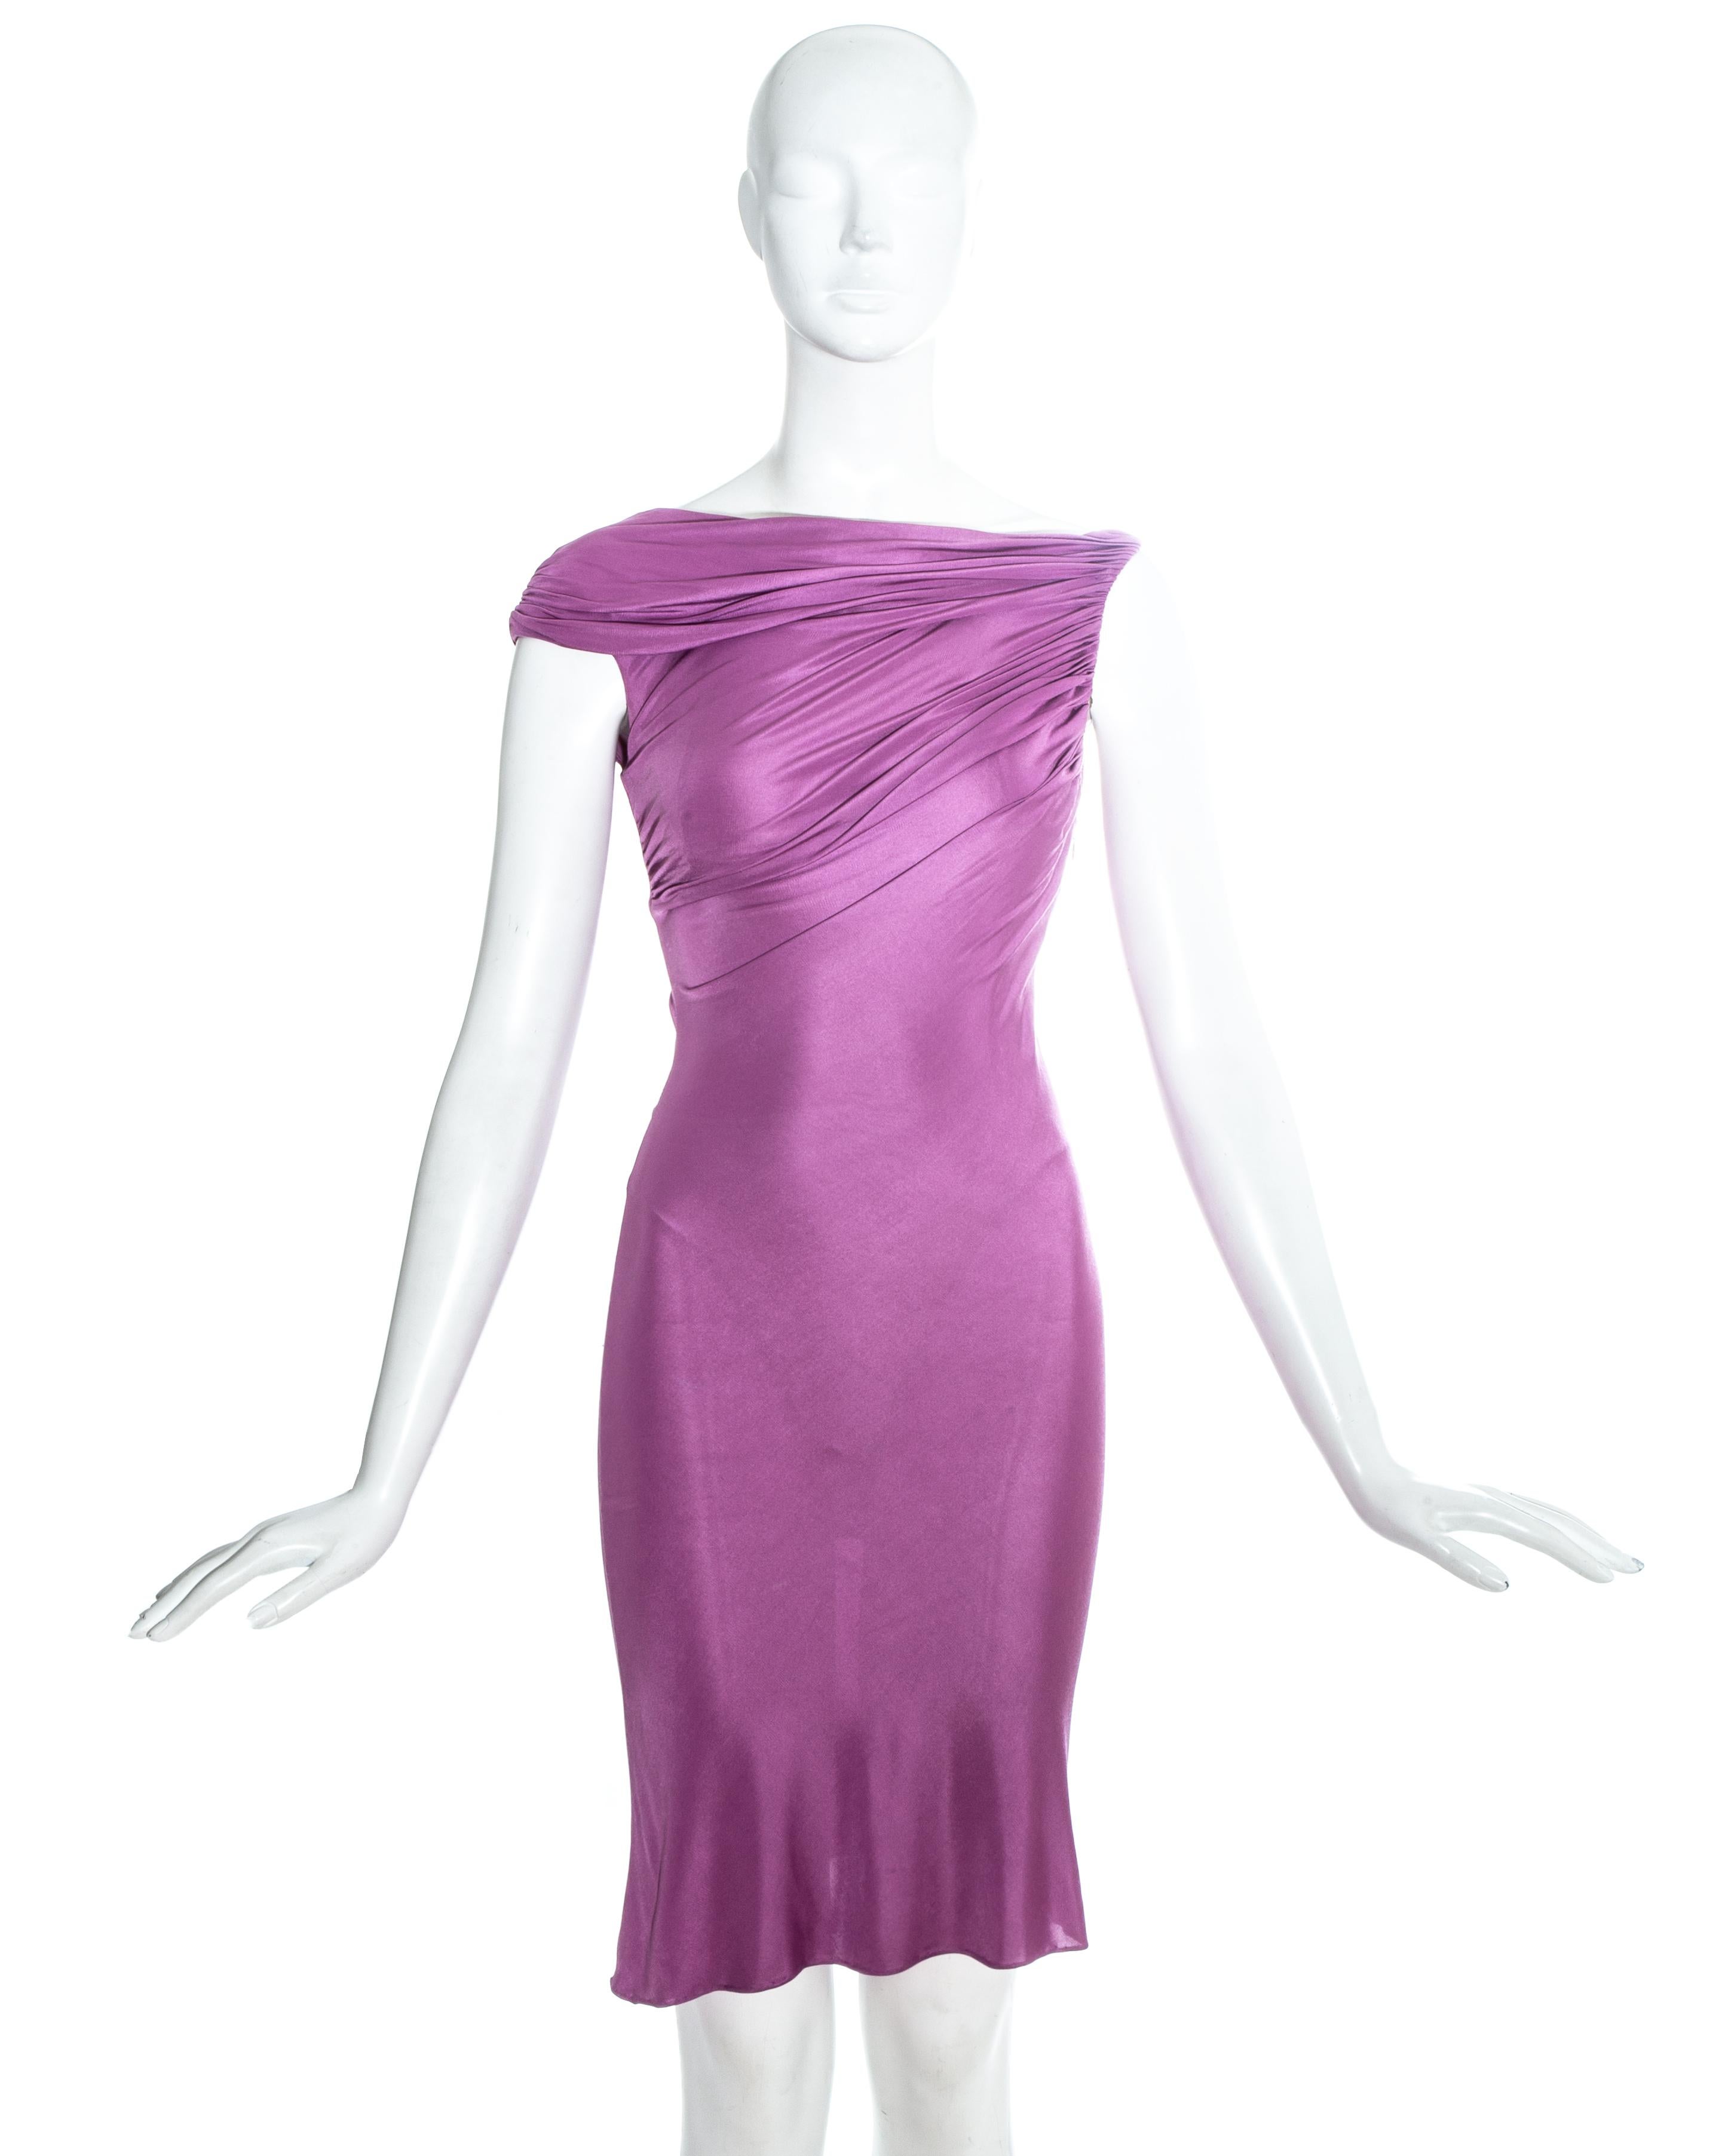 Gianni Versace pink jersey draped mid-length evening dress with built-in nude bodysuit.

Spring-Summer 1998